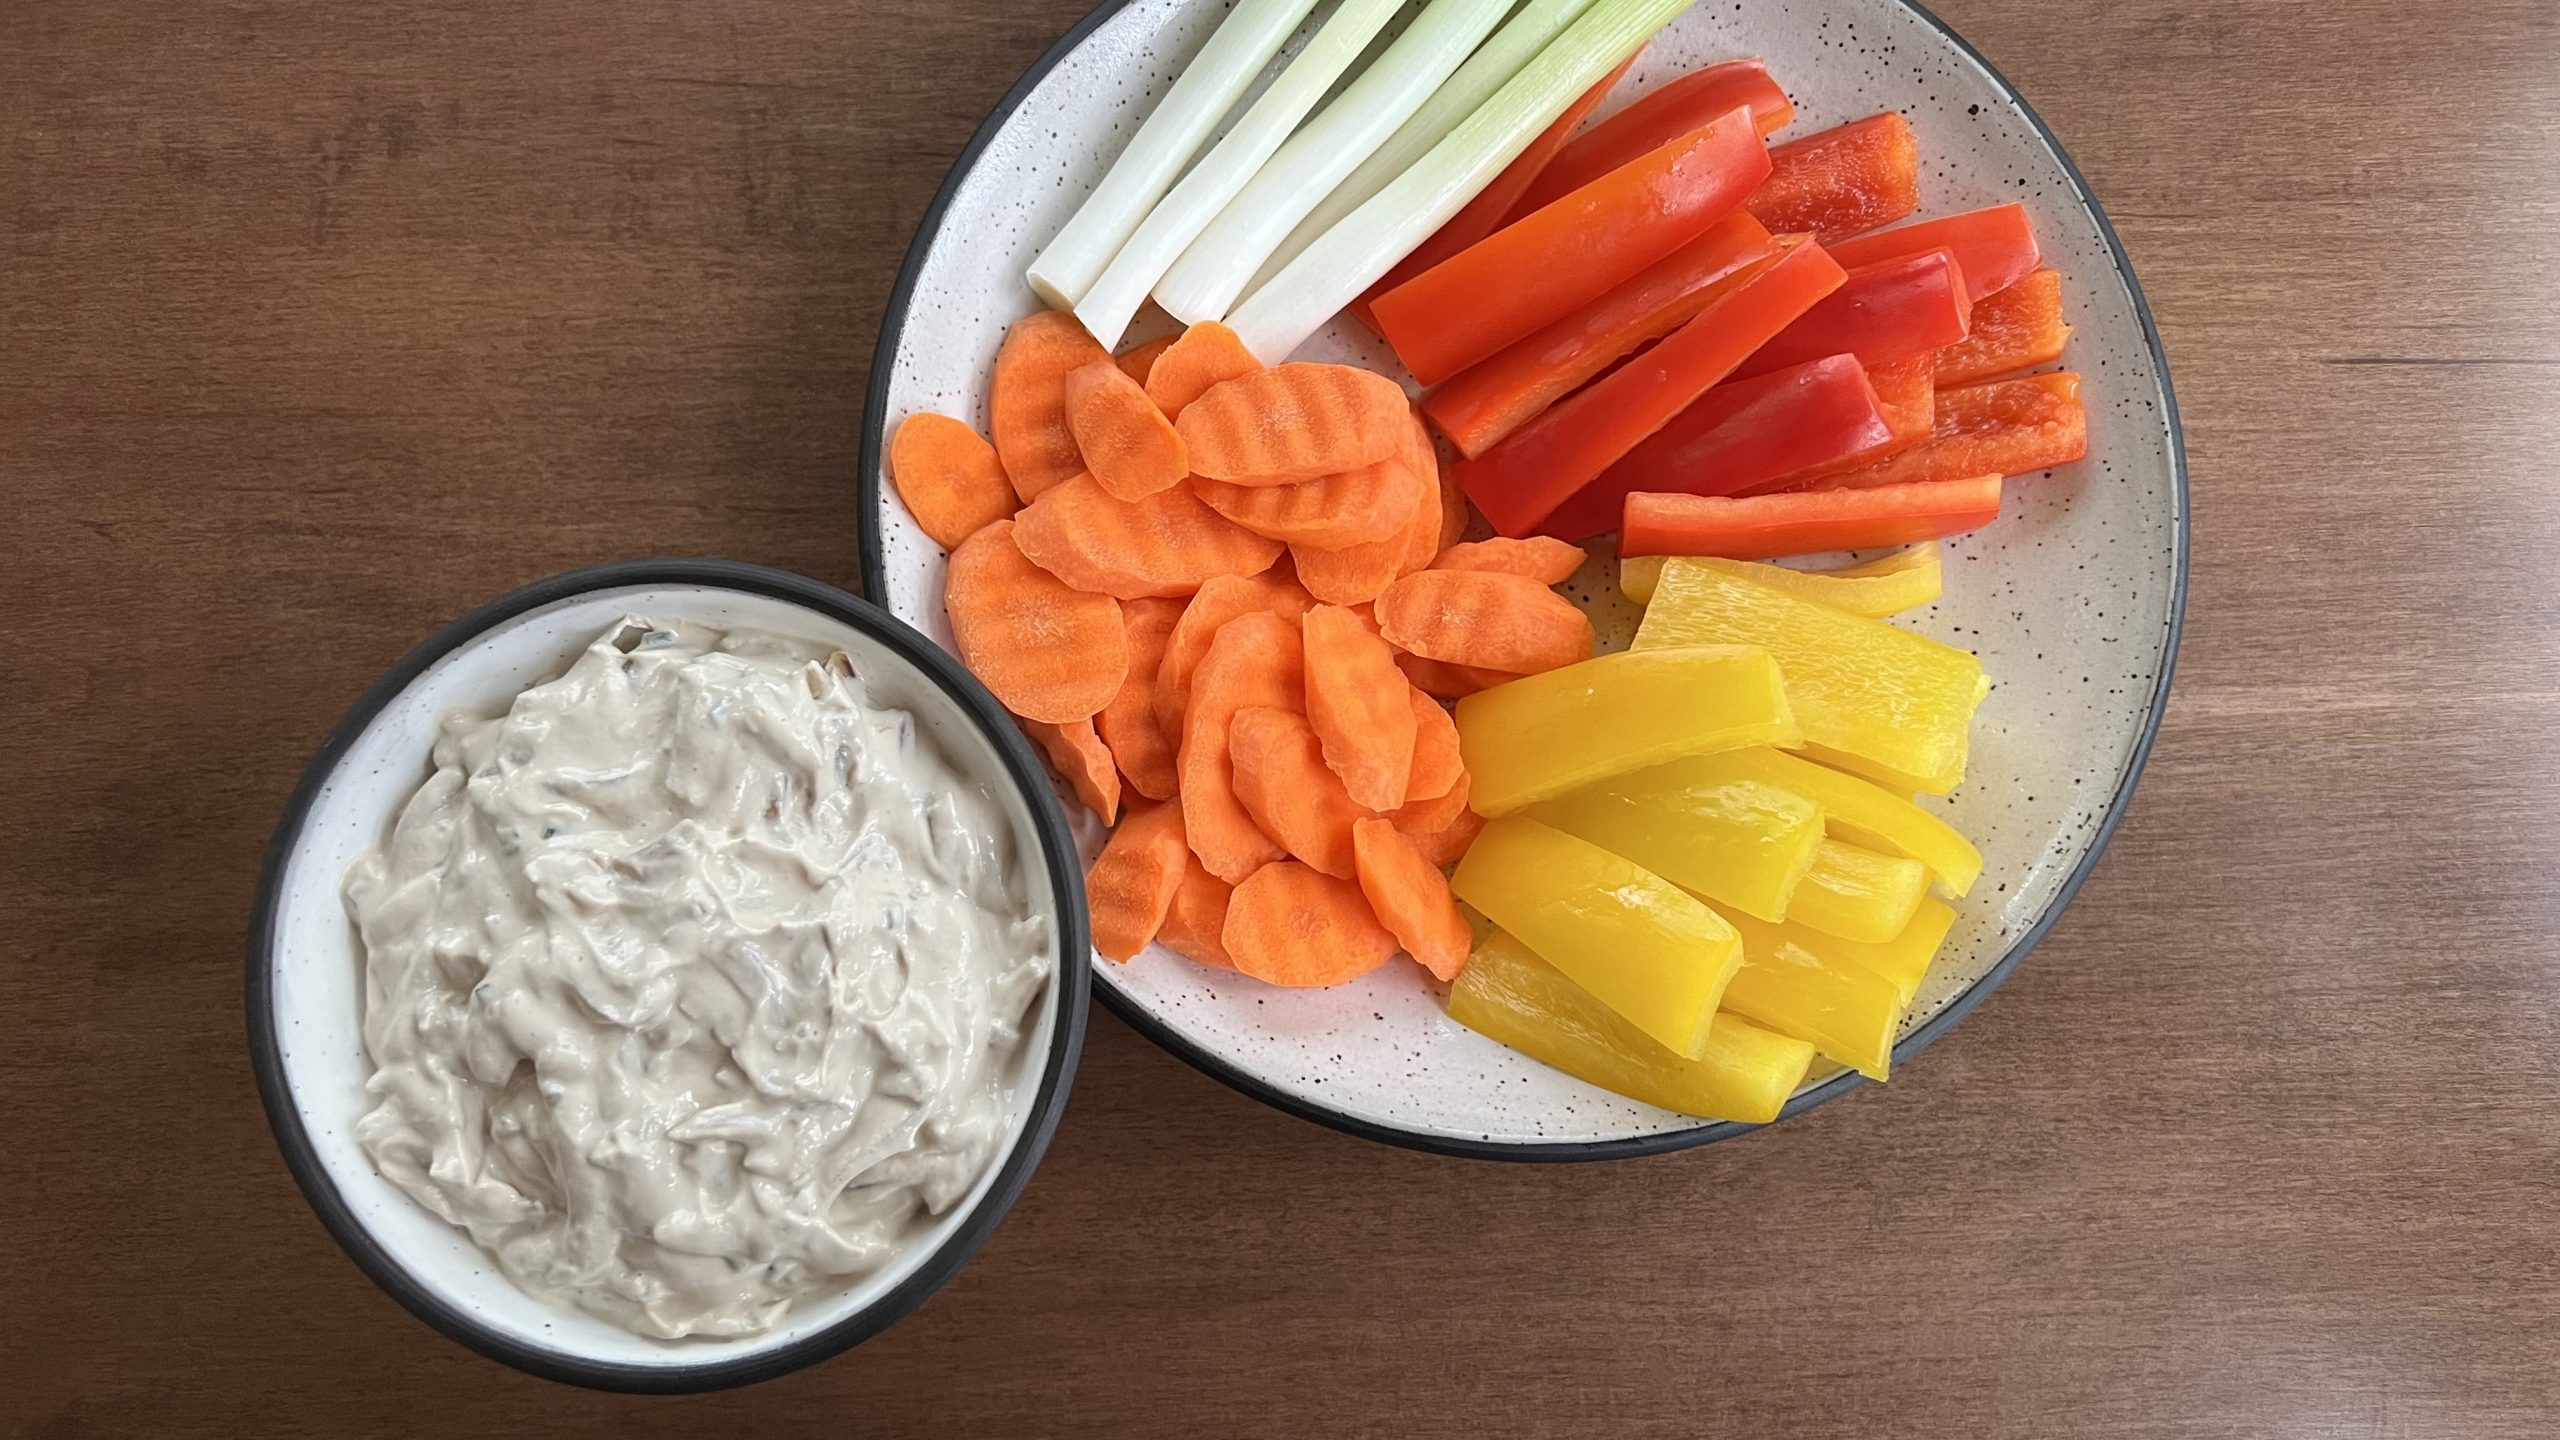 Caramelized Onion Dip with Vegetables